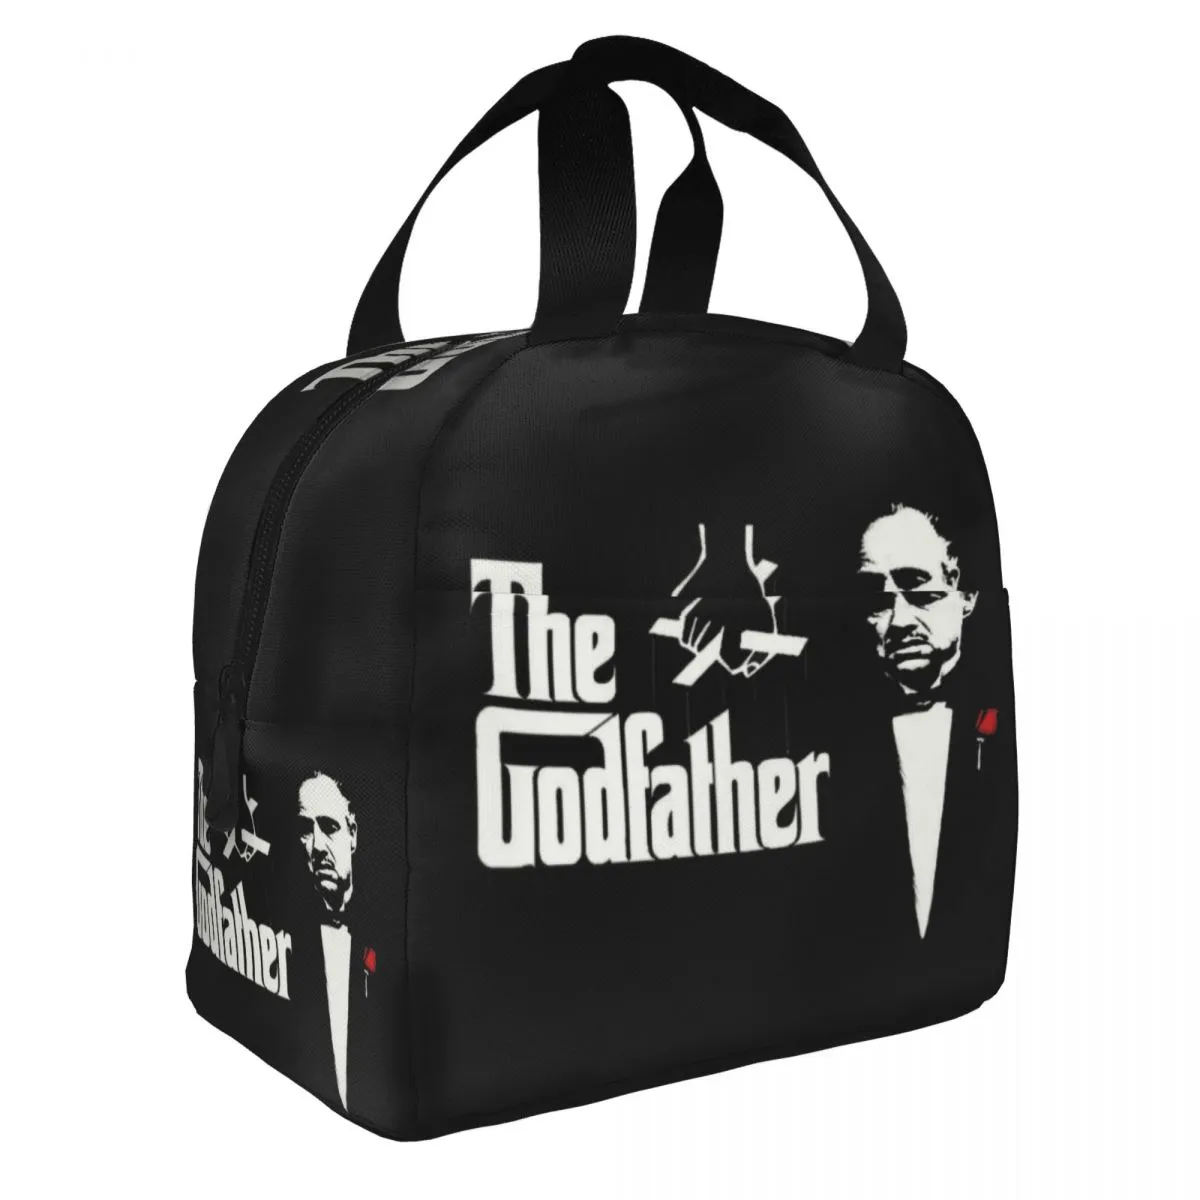 The Godfather Isolated Lunch Bag For Women Kids Gangster Movie Reusable Cooler Thermal Lunch Box Picnic Food Container Bags